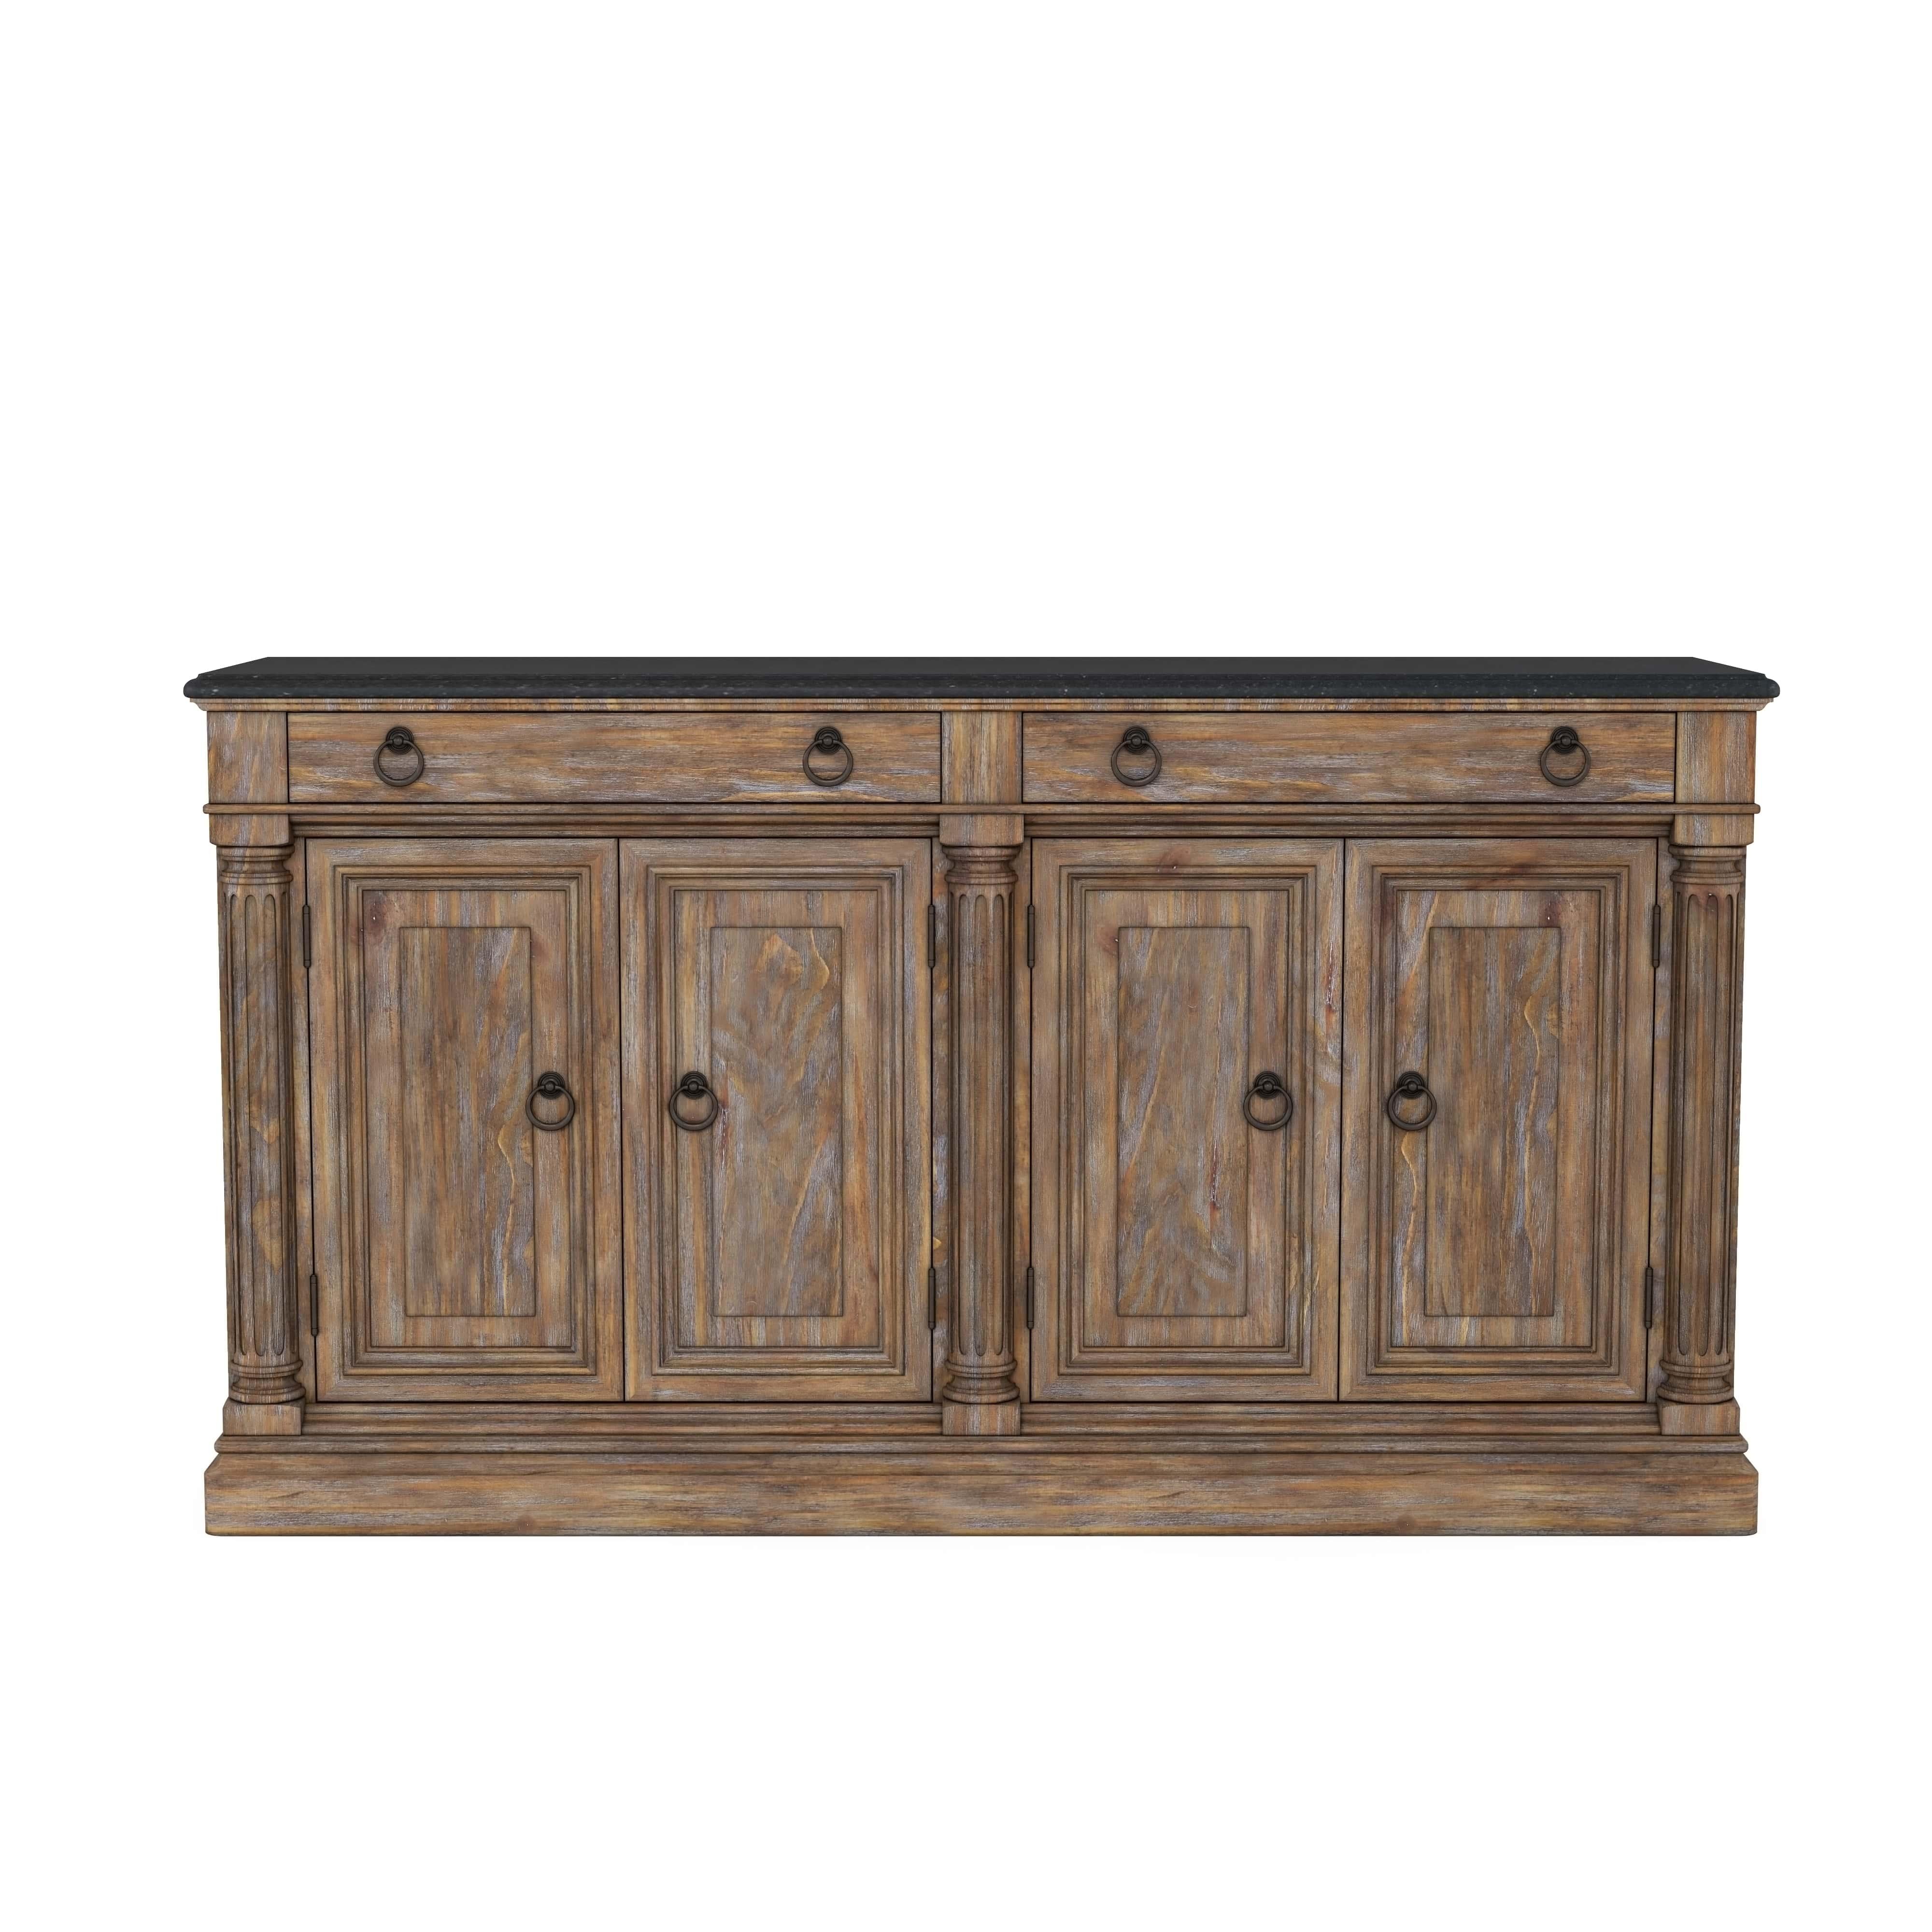 Traditional, Farmhouse Buffet Architrave 277252-2608 in Brown 